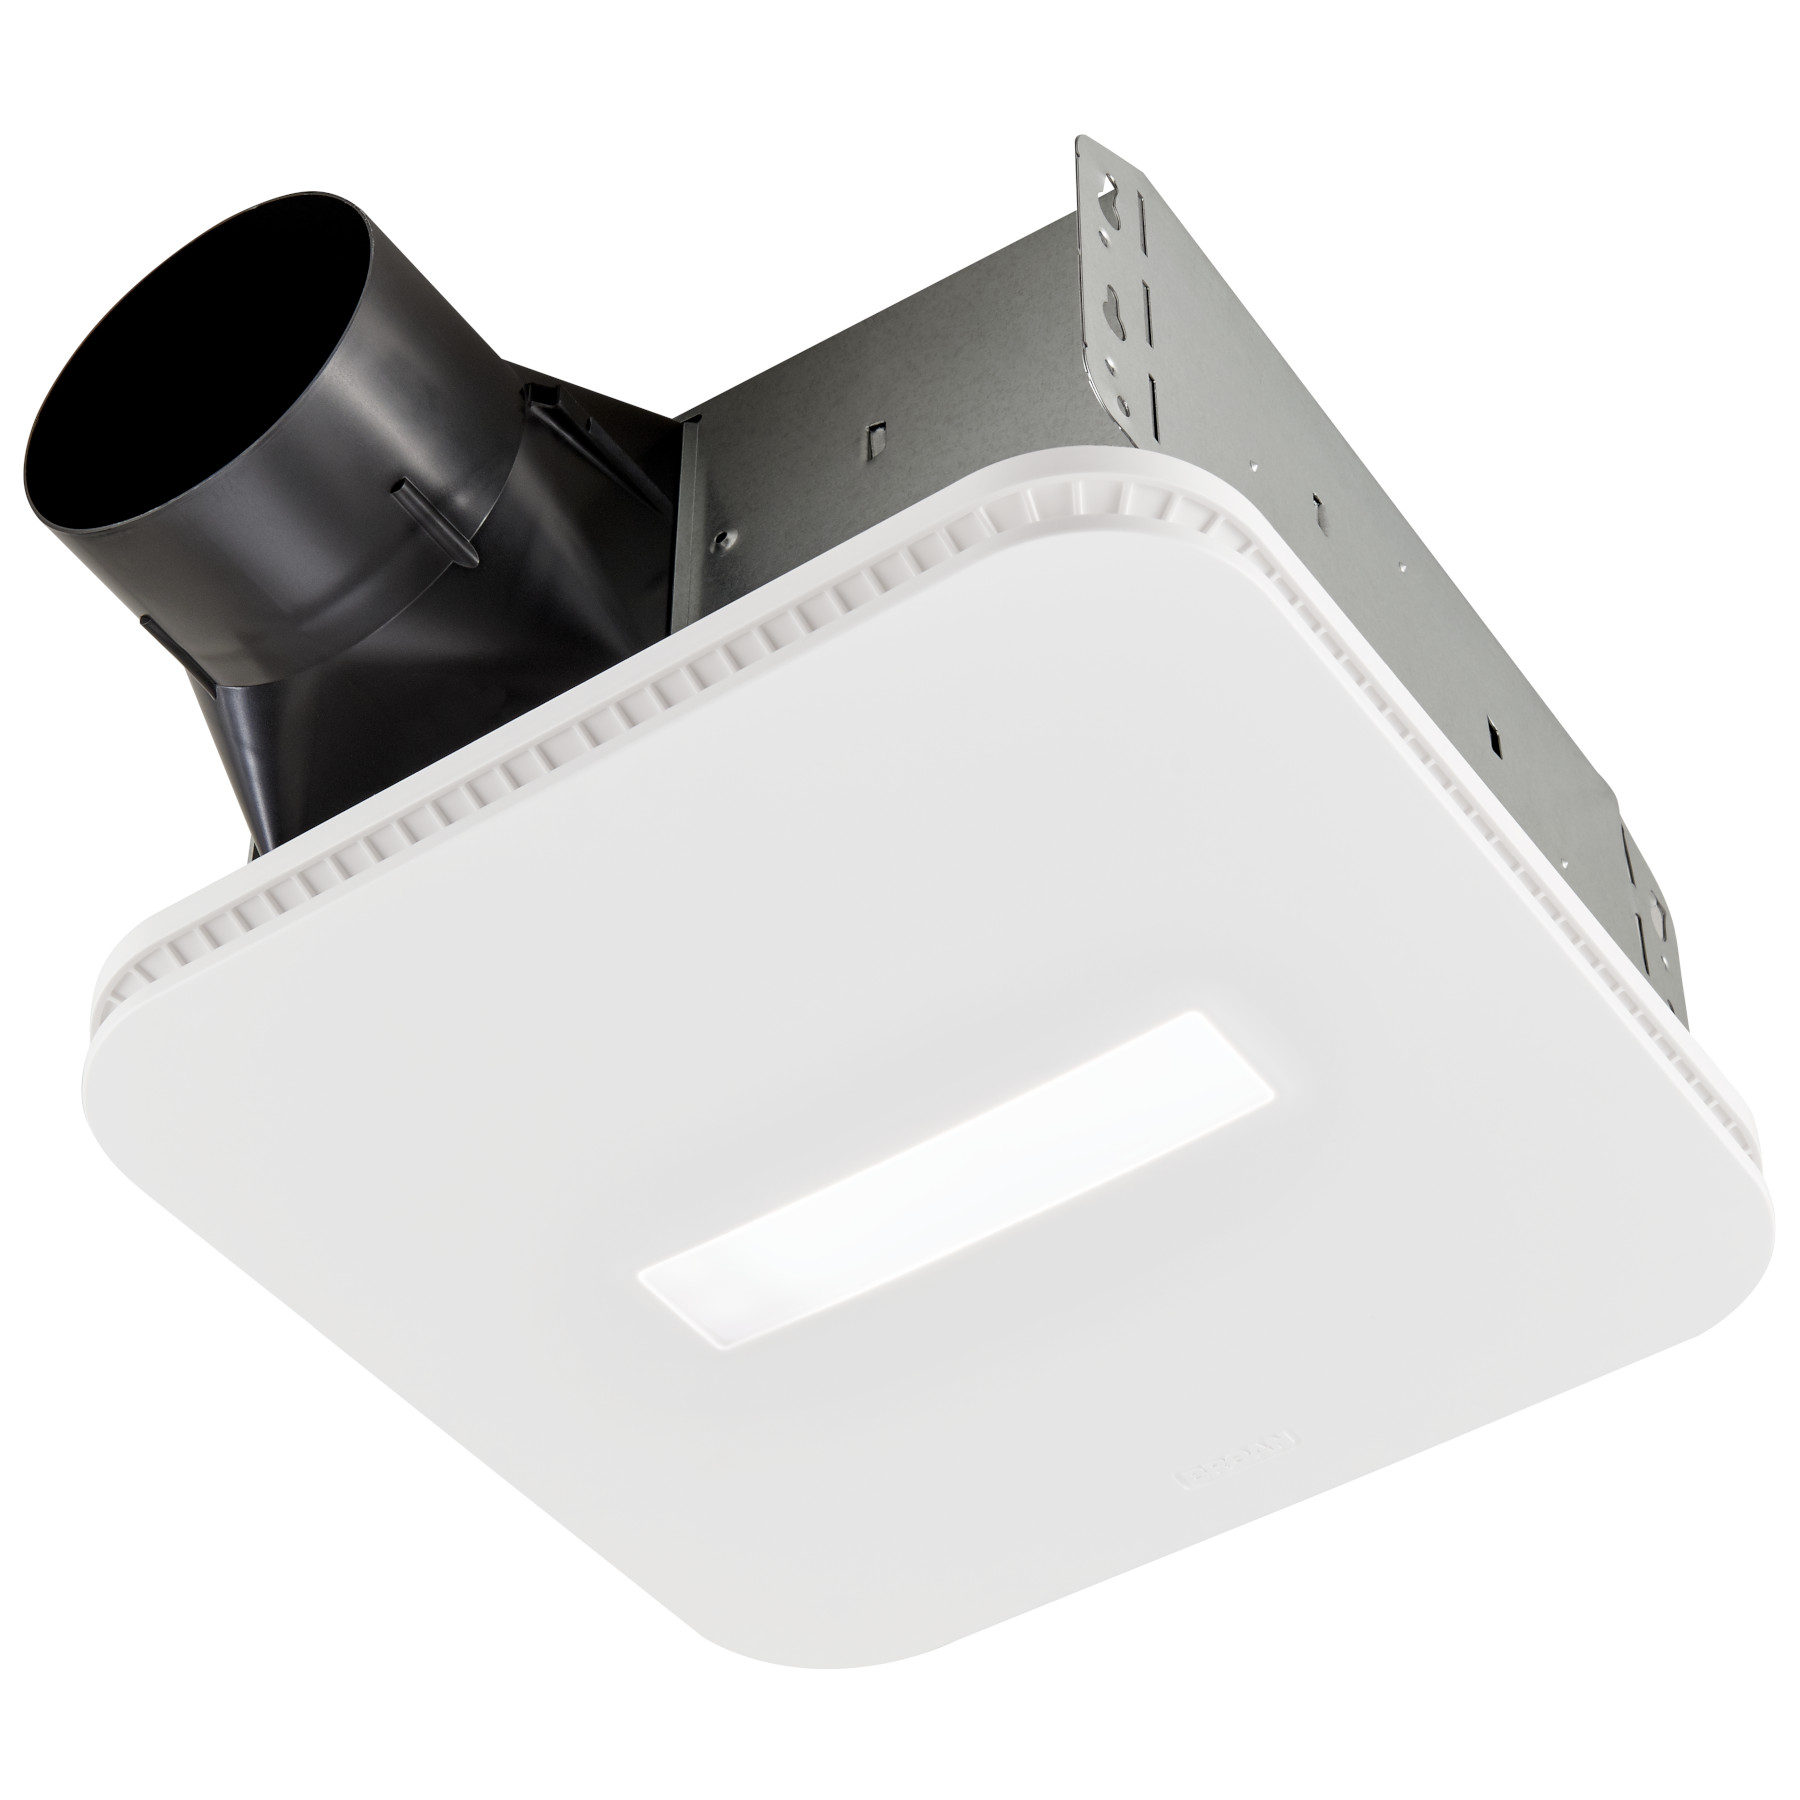 AE110LK 110 Bathroom Exhaust LED Lighted CleanCover™ Grille, ENERGY STAR